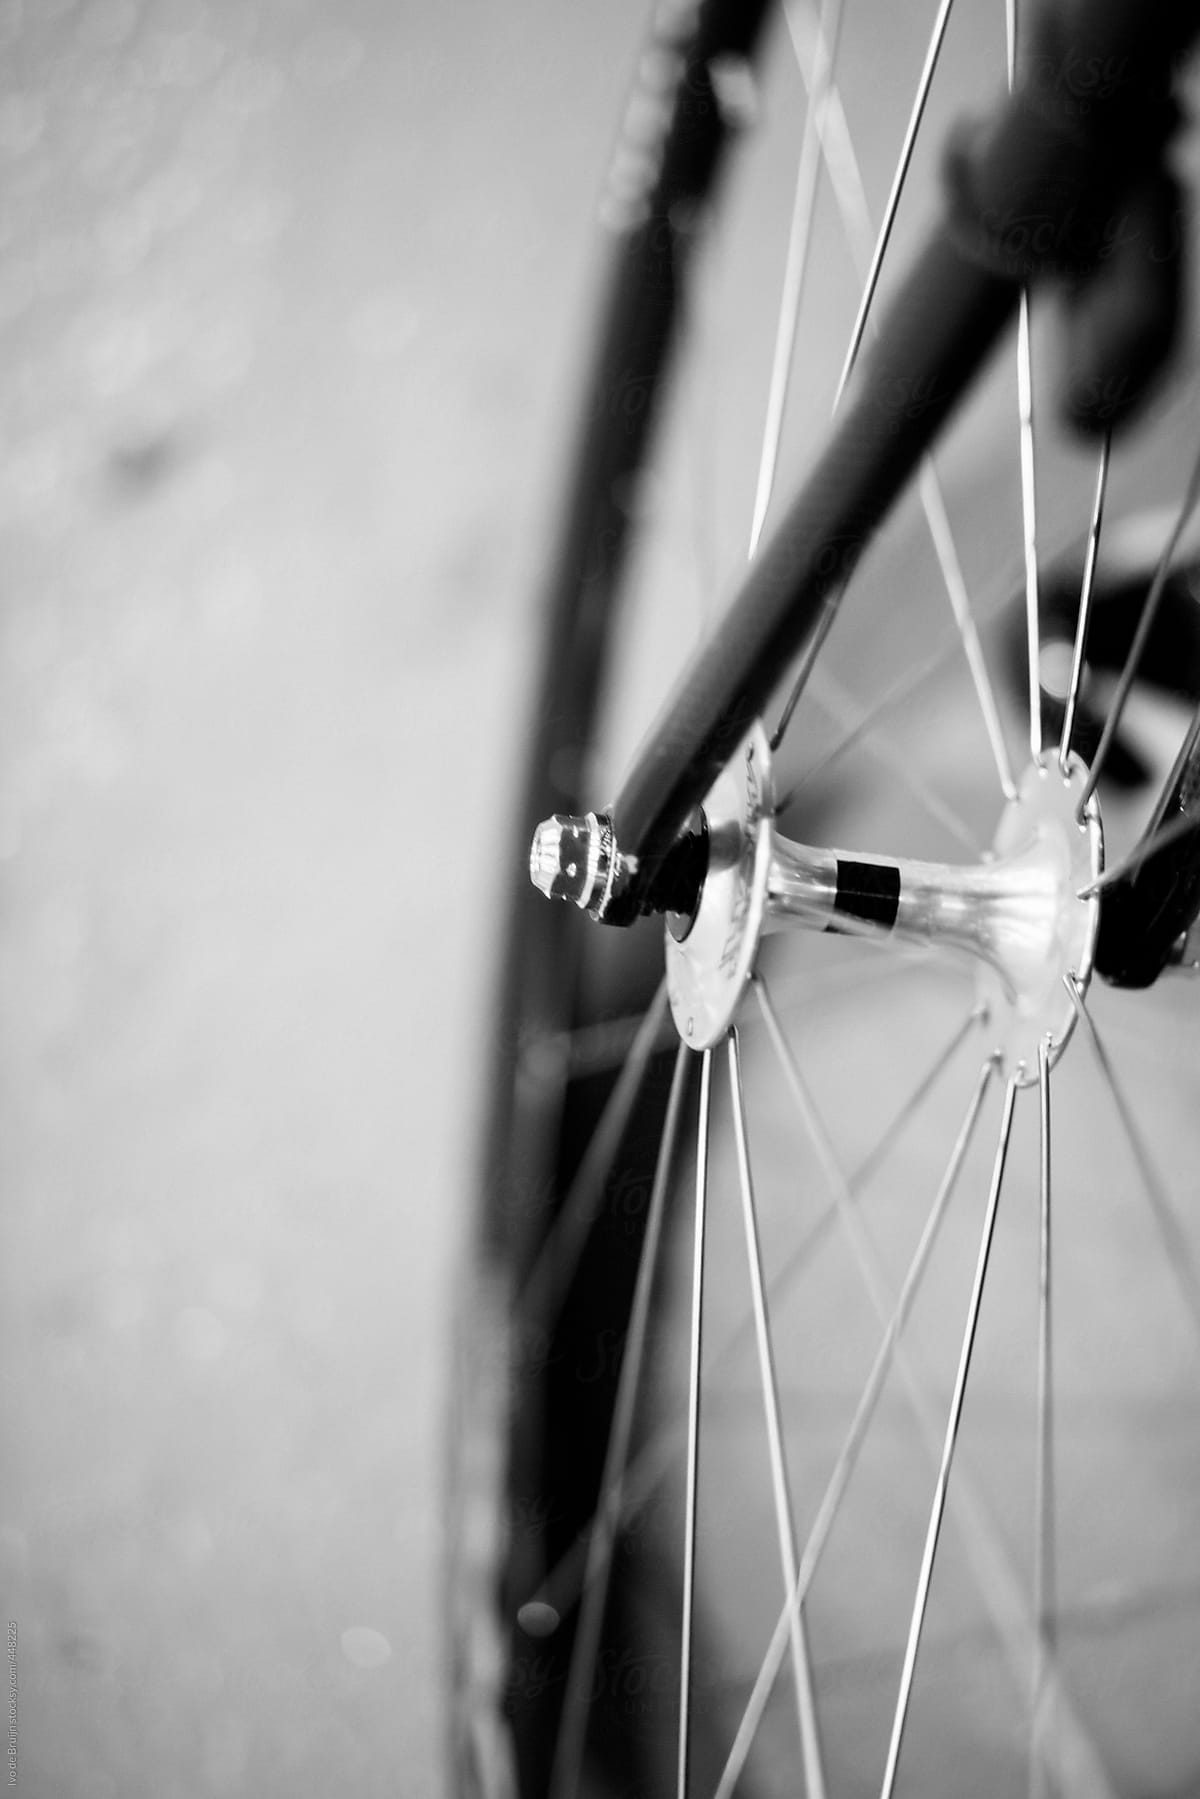 Black and white image of the wheel of a bicycle